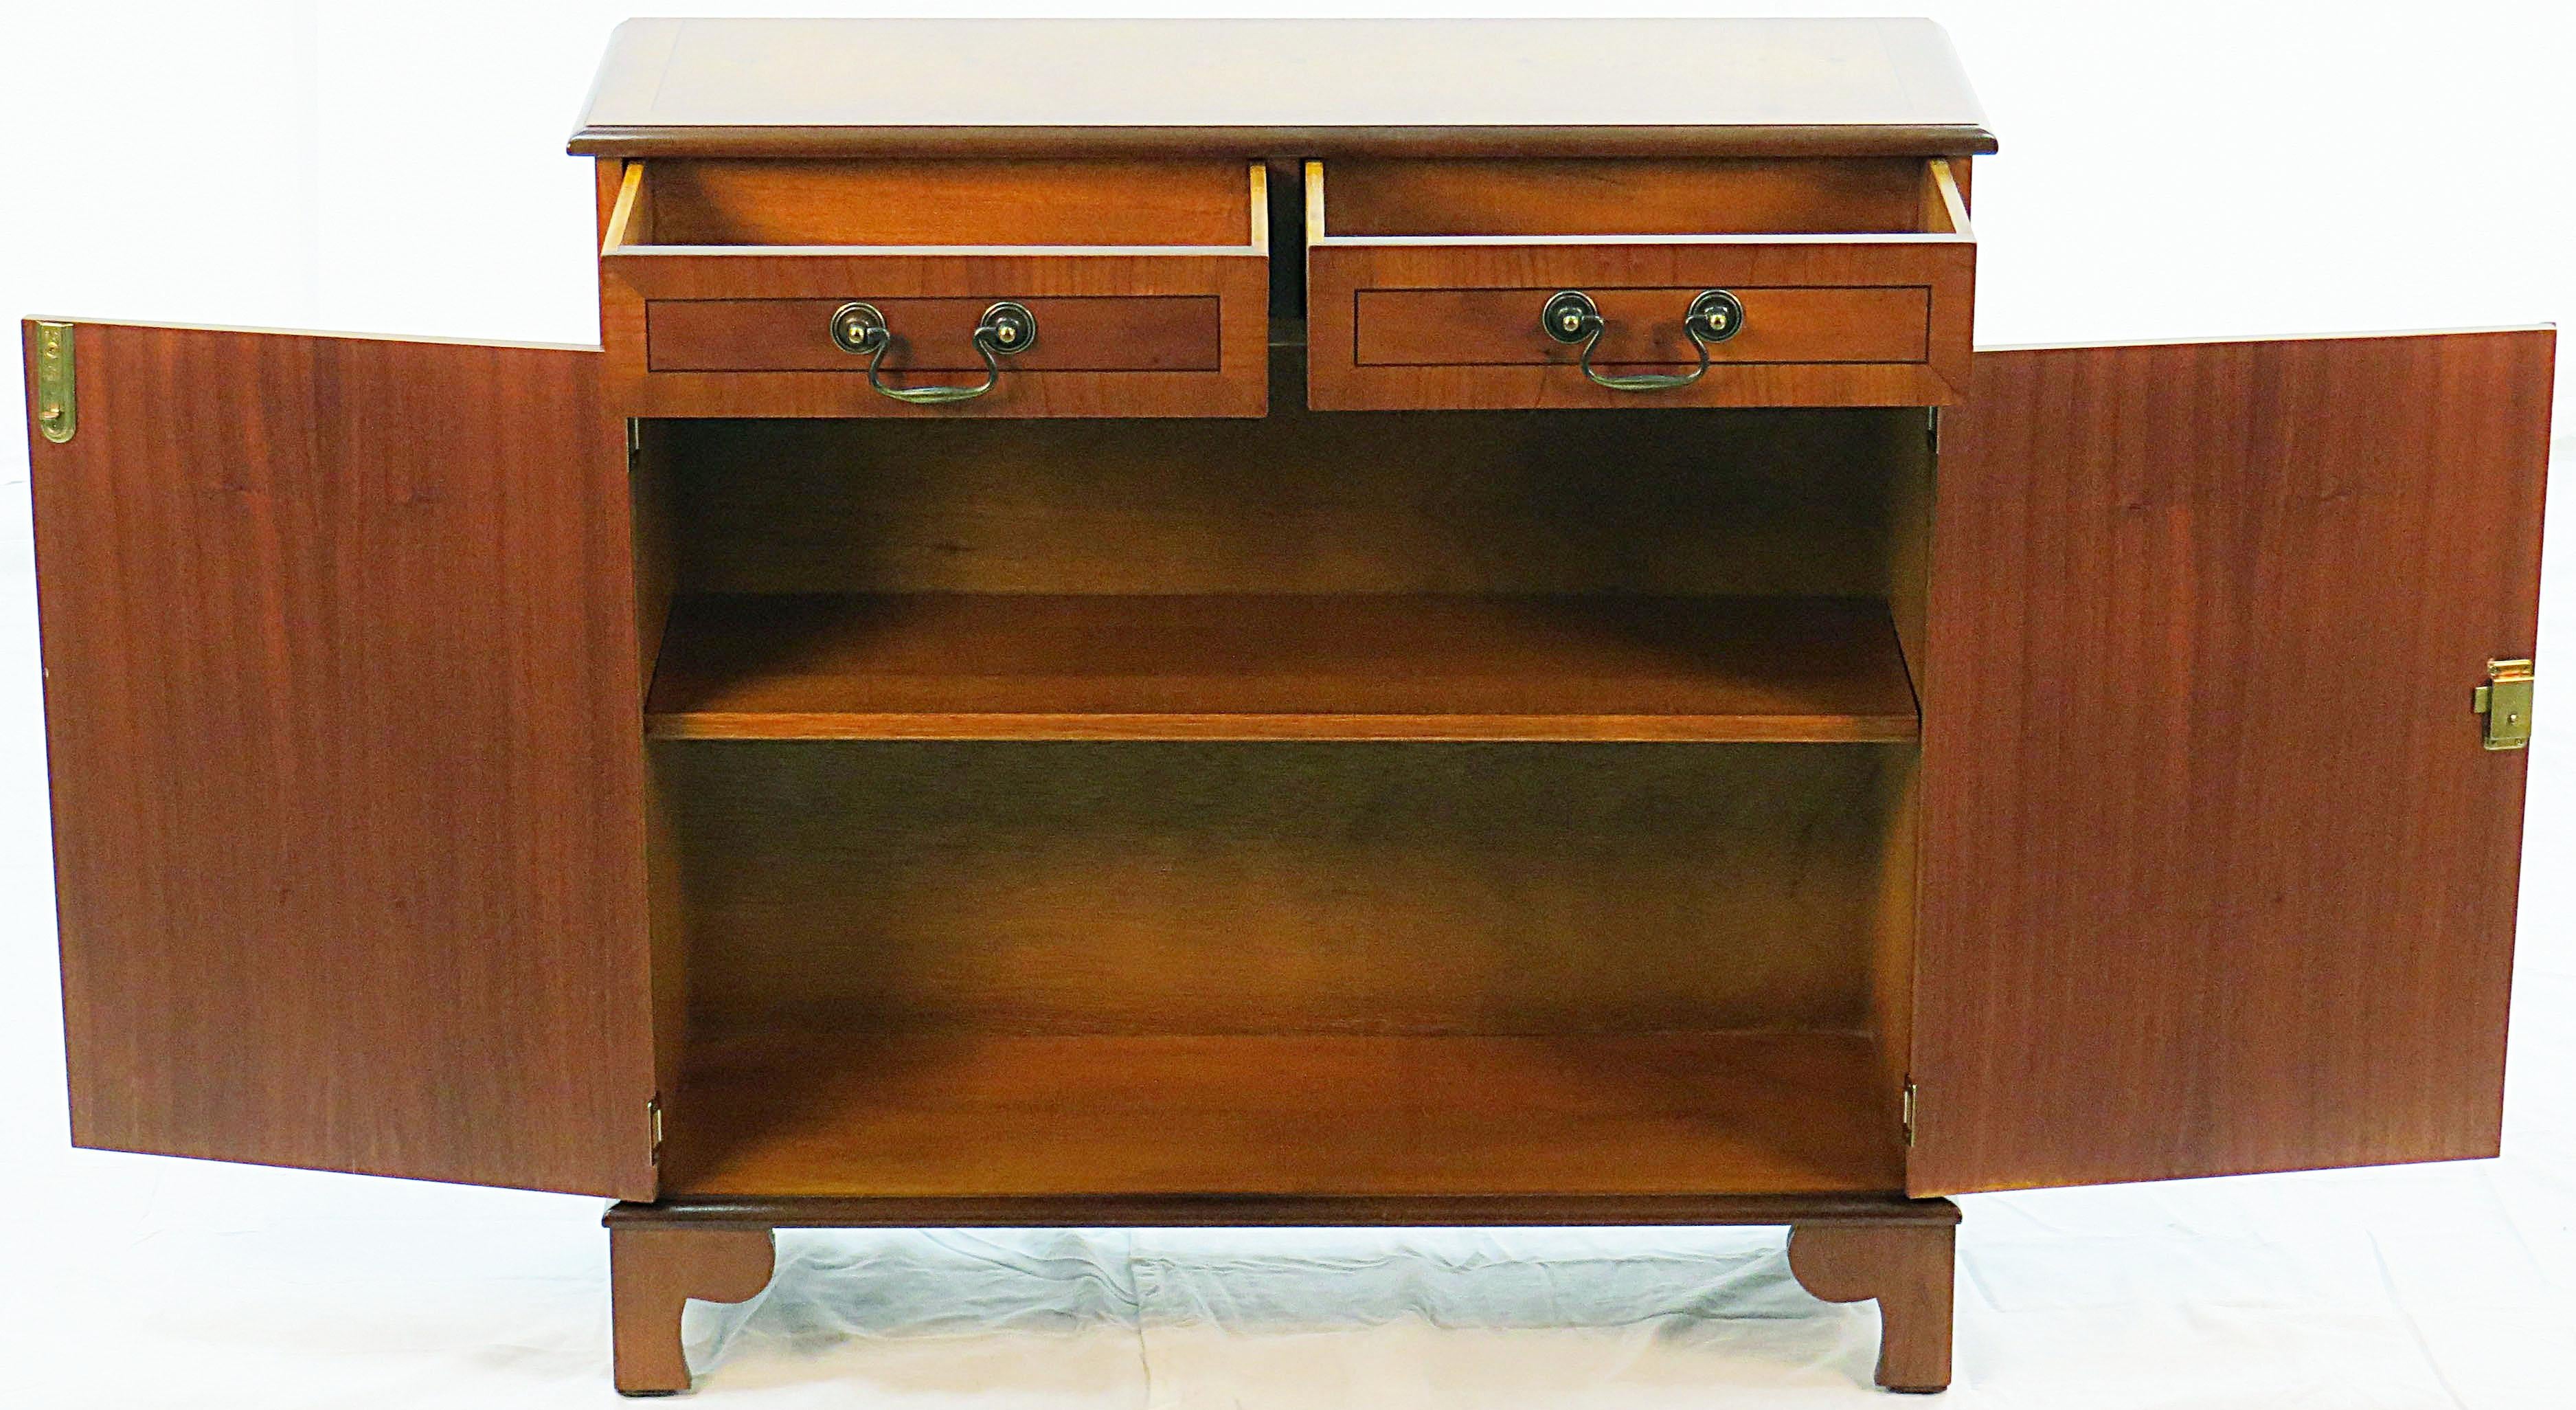 Hailing from England where it was made circa 1960 is this quaint vintage side cabinet. Crafted from the unusual yew wood, it is a beautiful piece of furniture that is just the right size for a plethora of uses.

Yew wood has a lighter color than